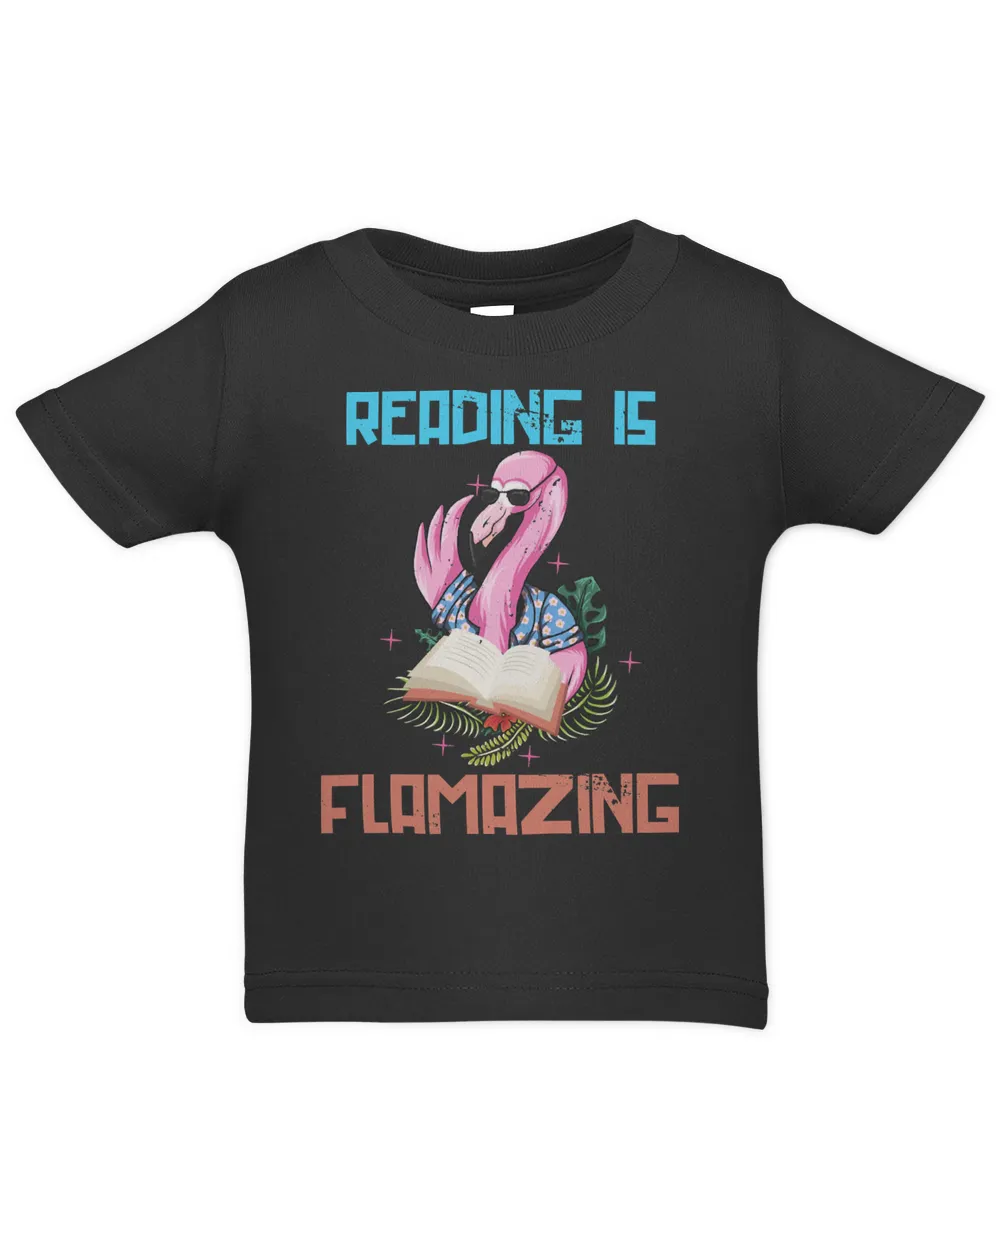 who also loves animals like the flamingo 378 Book Reader